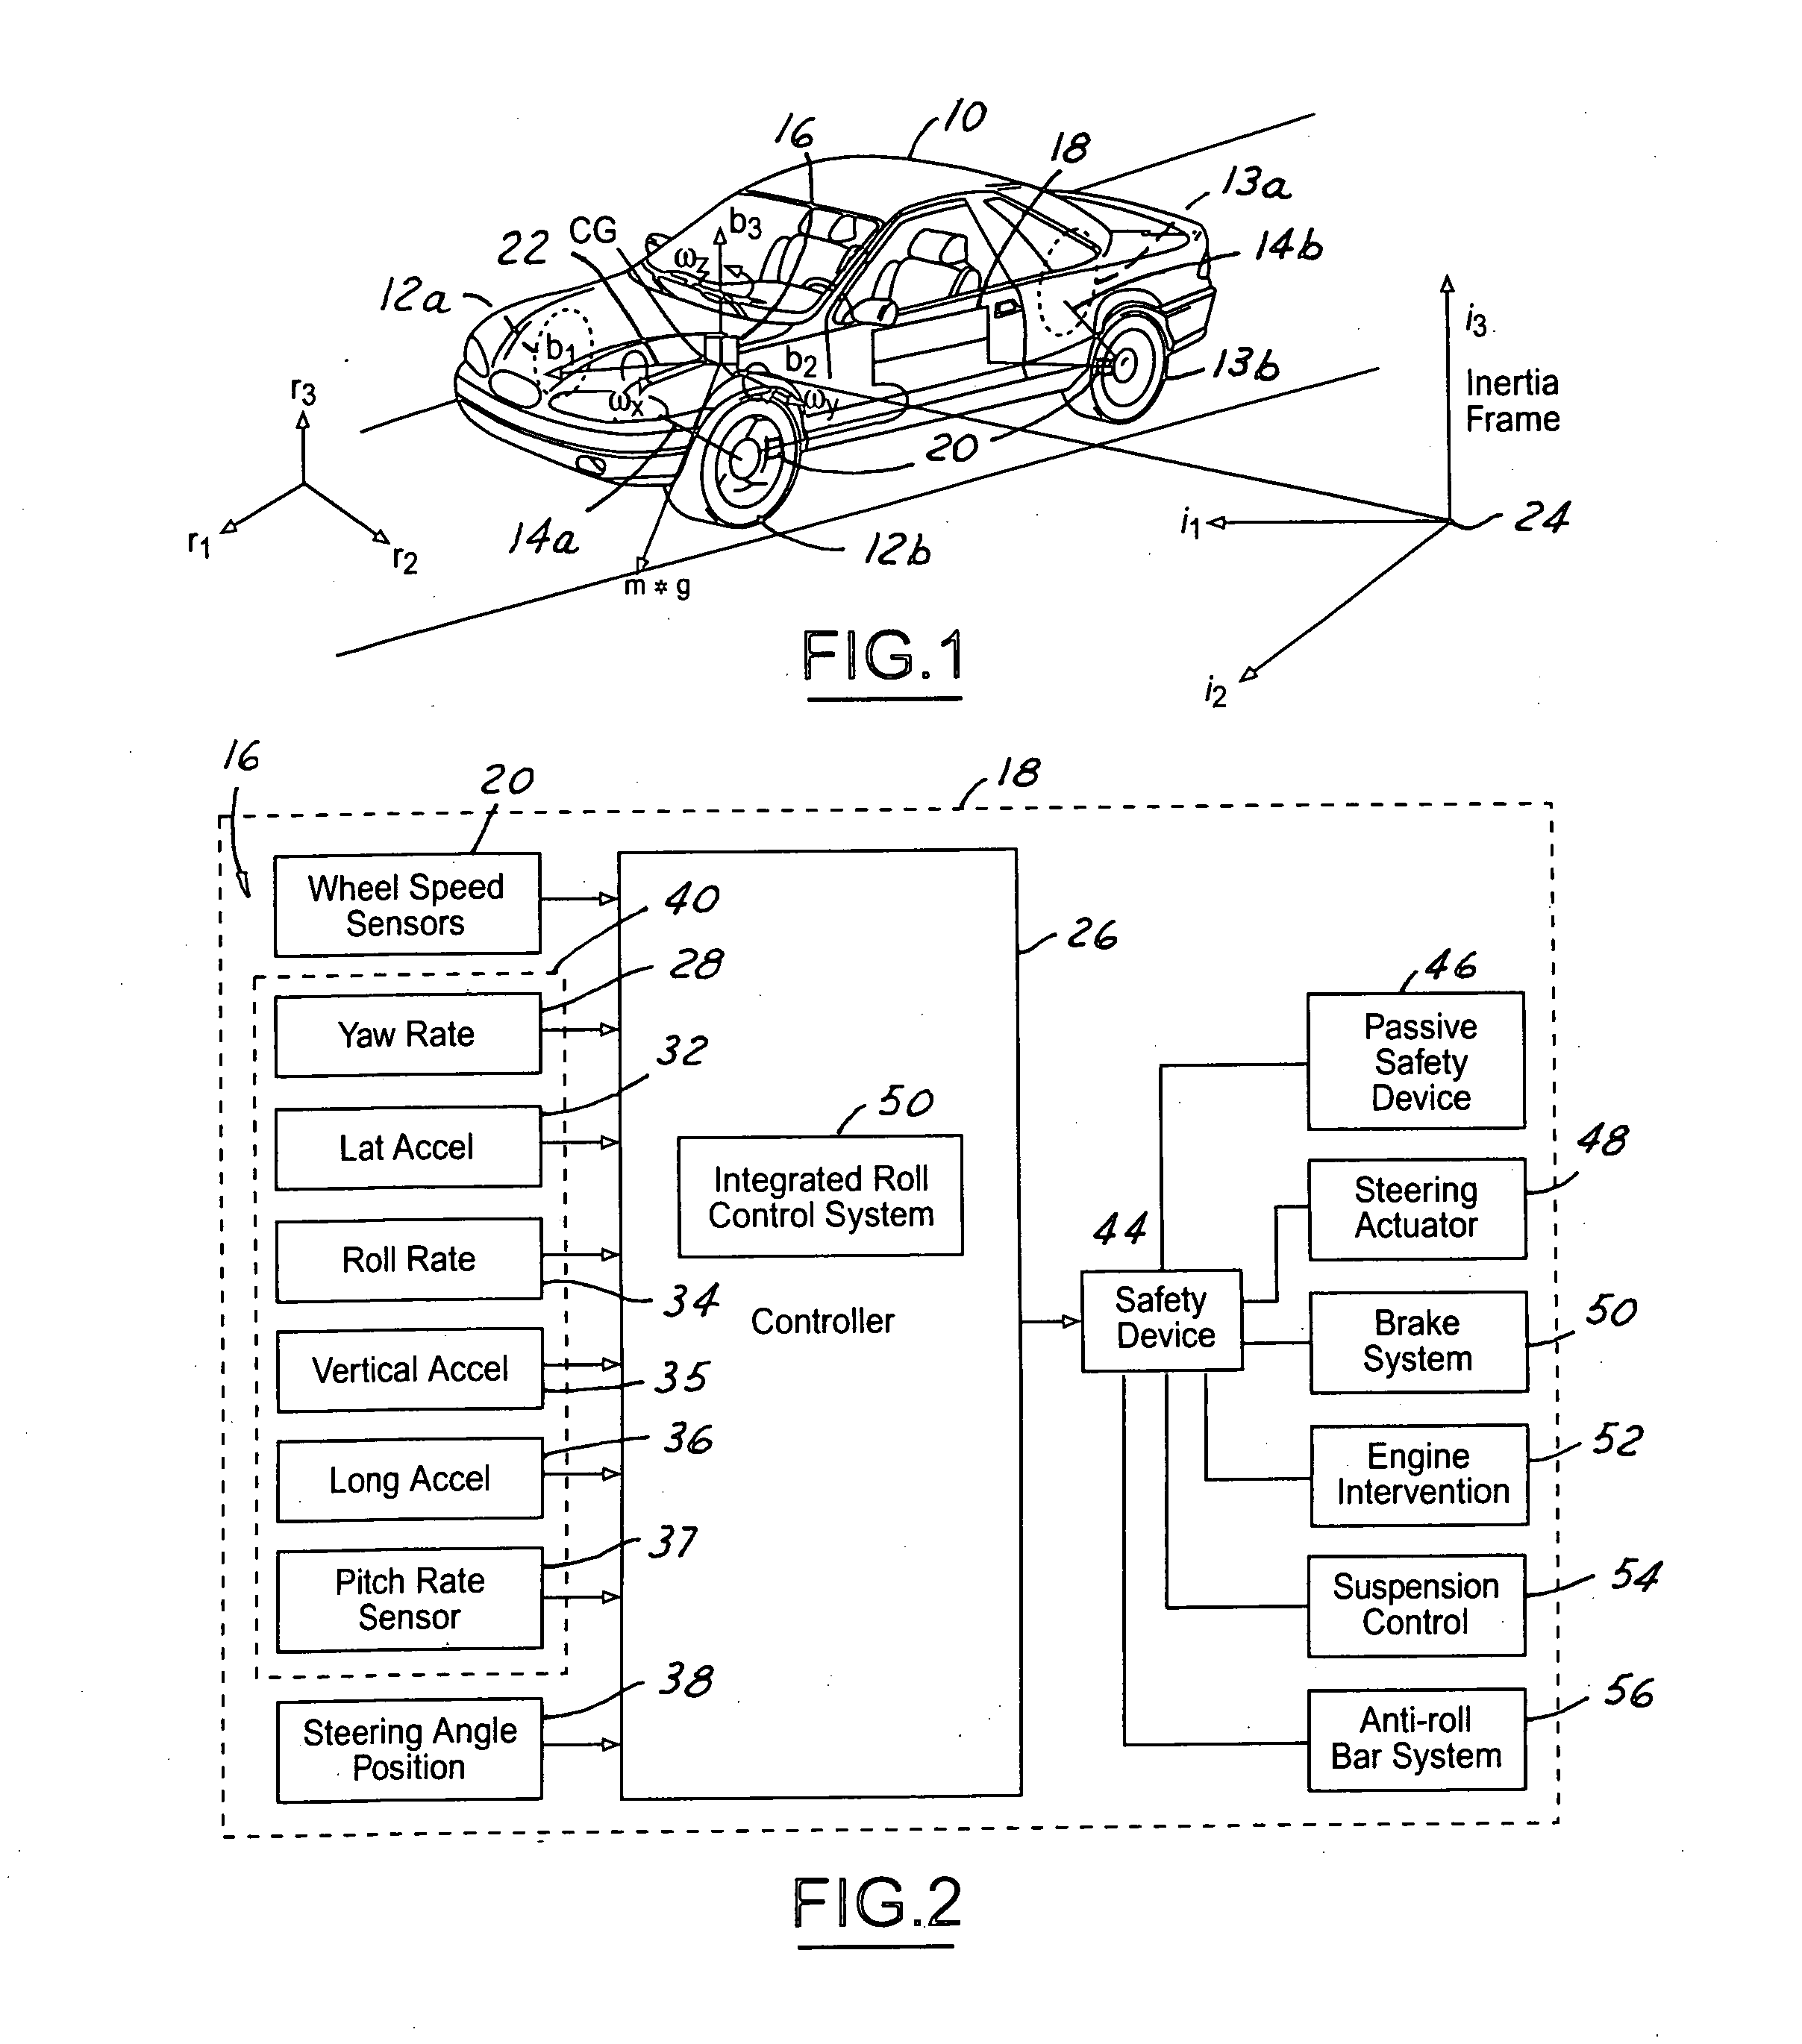 Roll stability control system for an automotive vehicle using coordinated control of anti-roll bar and brakes